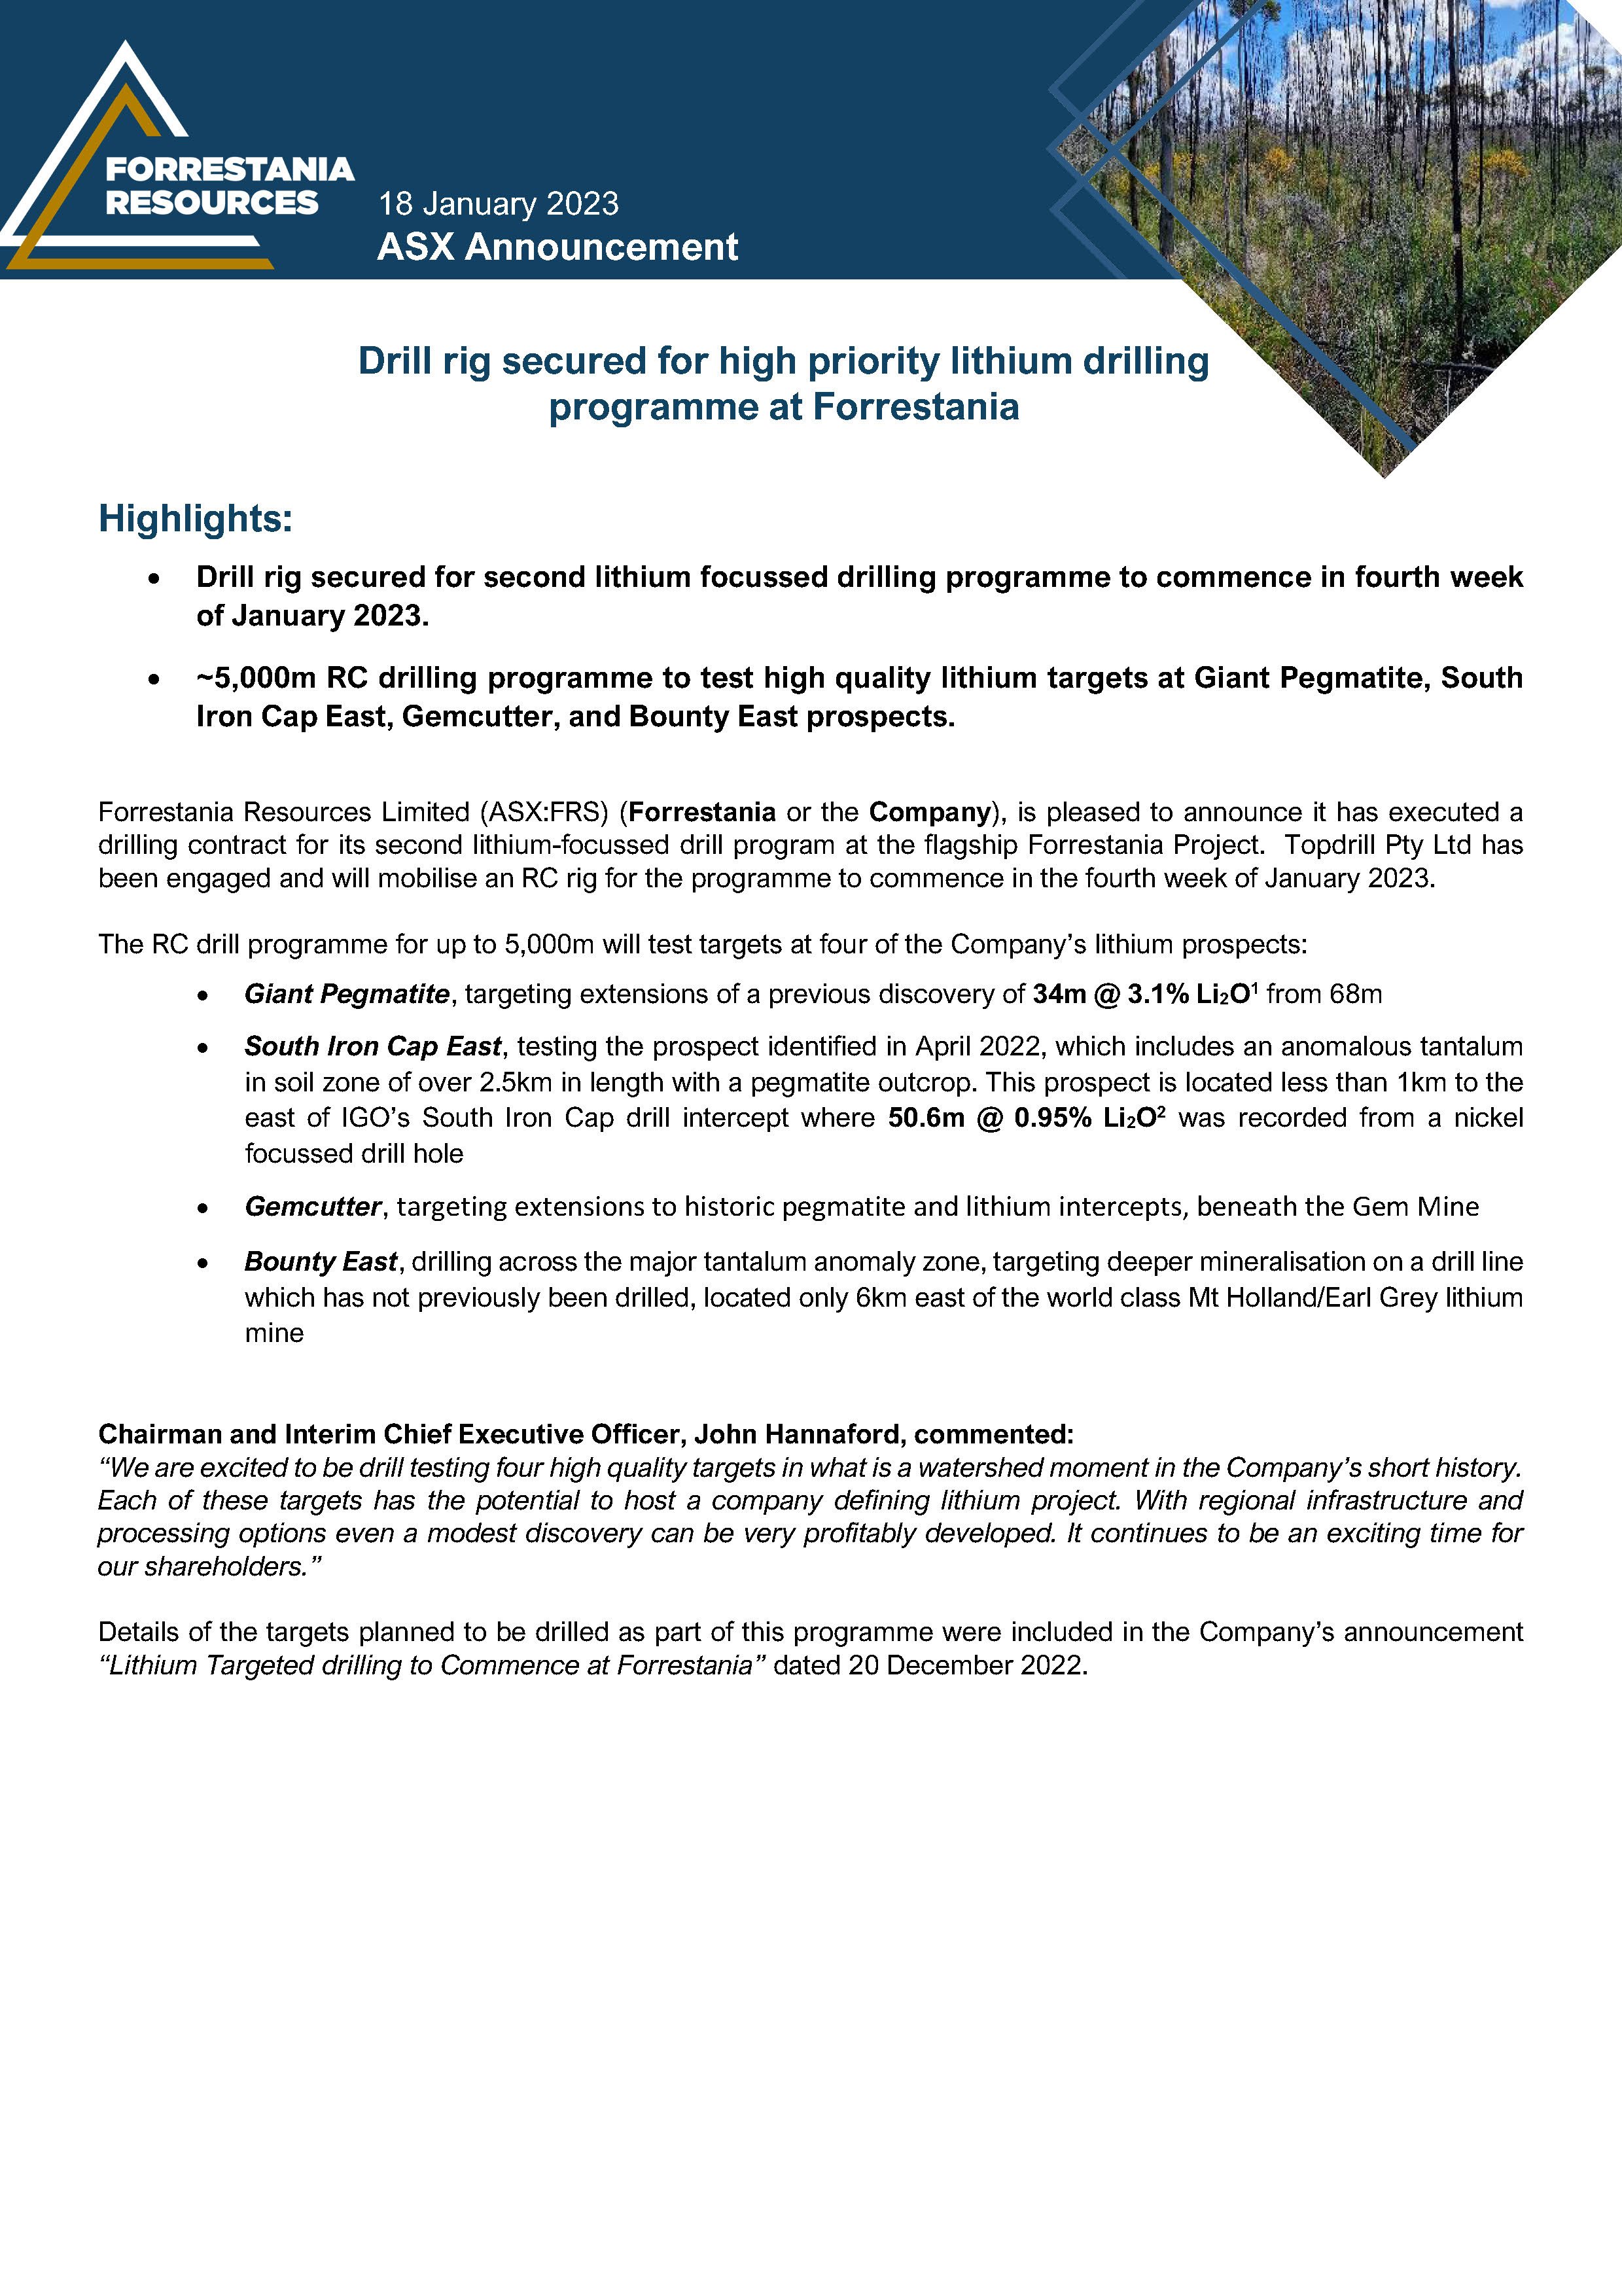 Drill rig secured for high priority lithium drilling programme at Forrestania